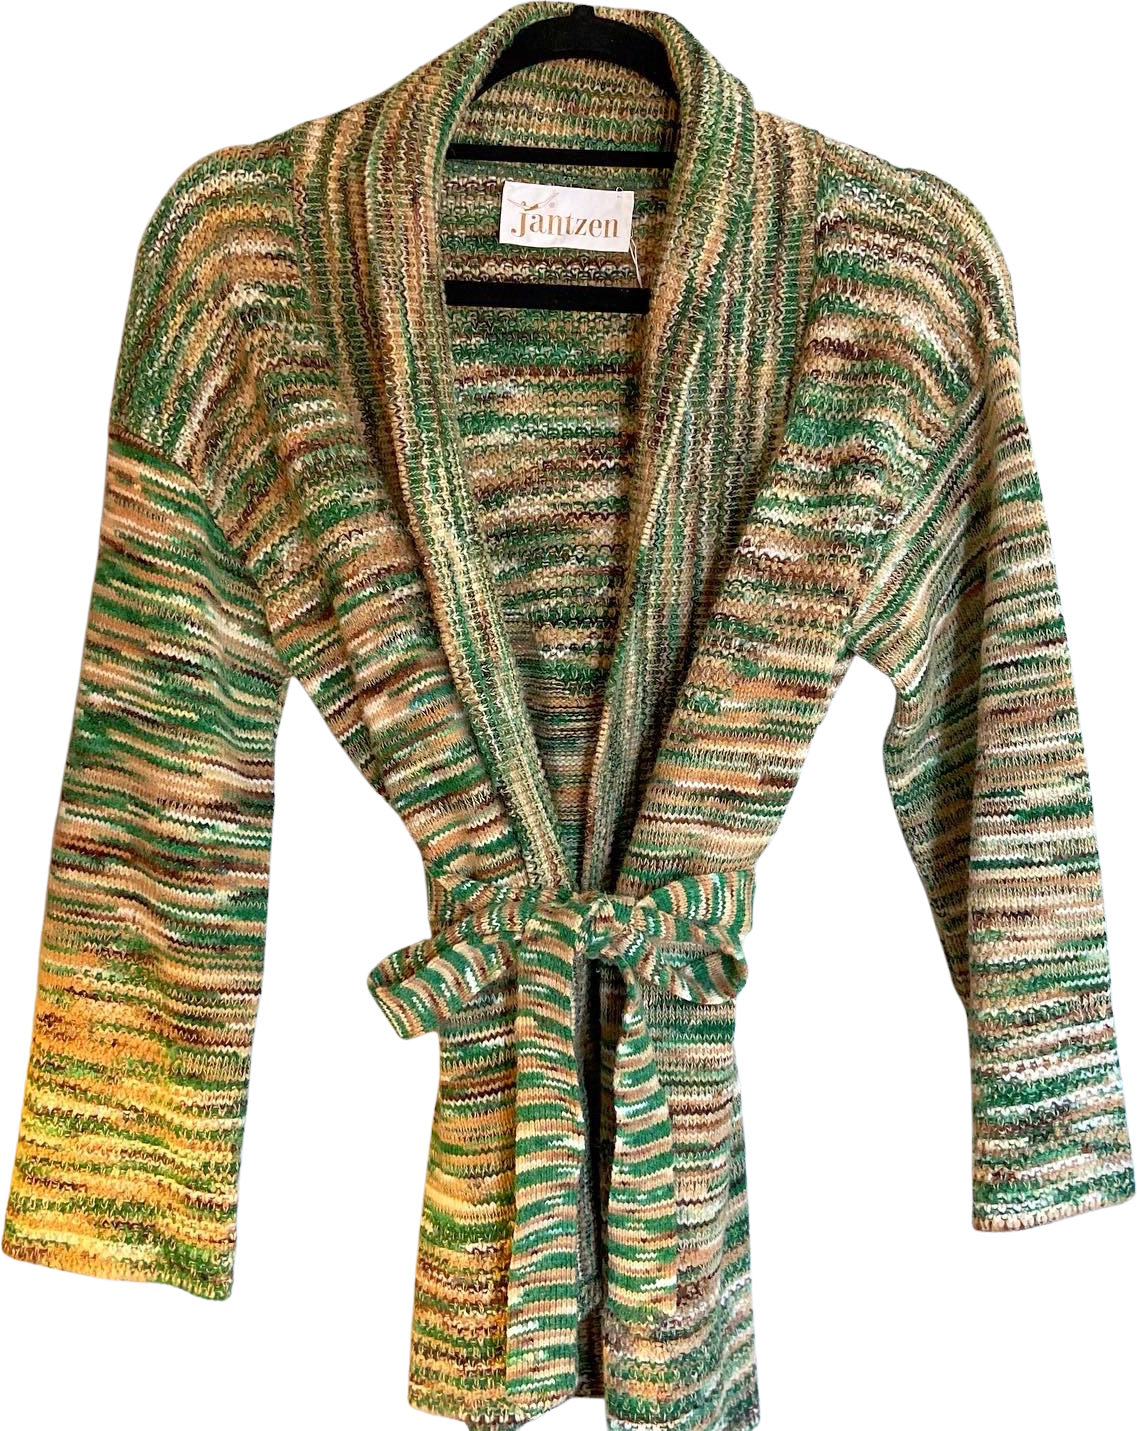 Vintage 70s Spacedyed Cardigan Sweater by Jantzen | Shop THRILLING